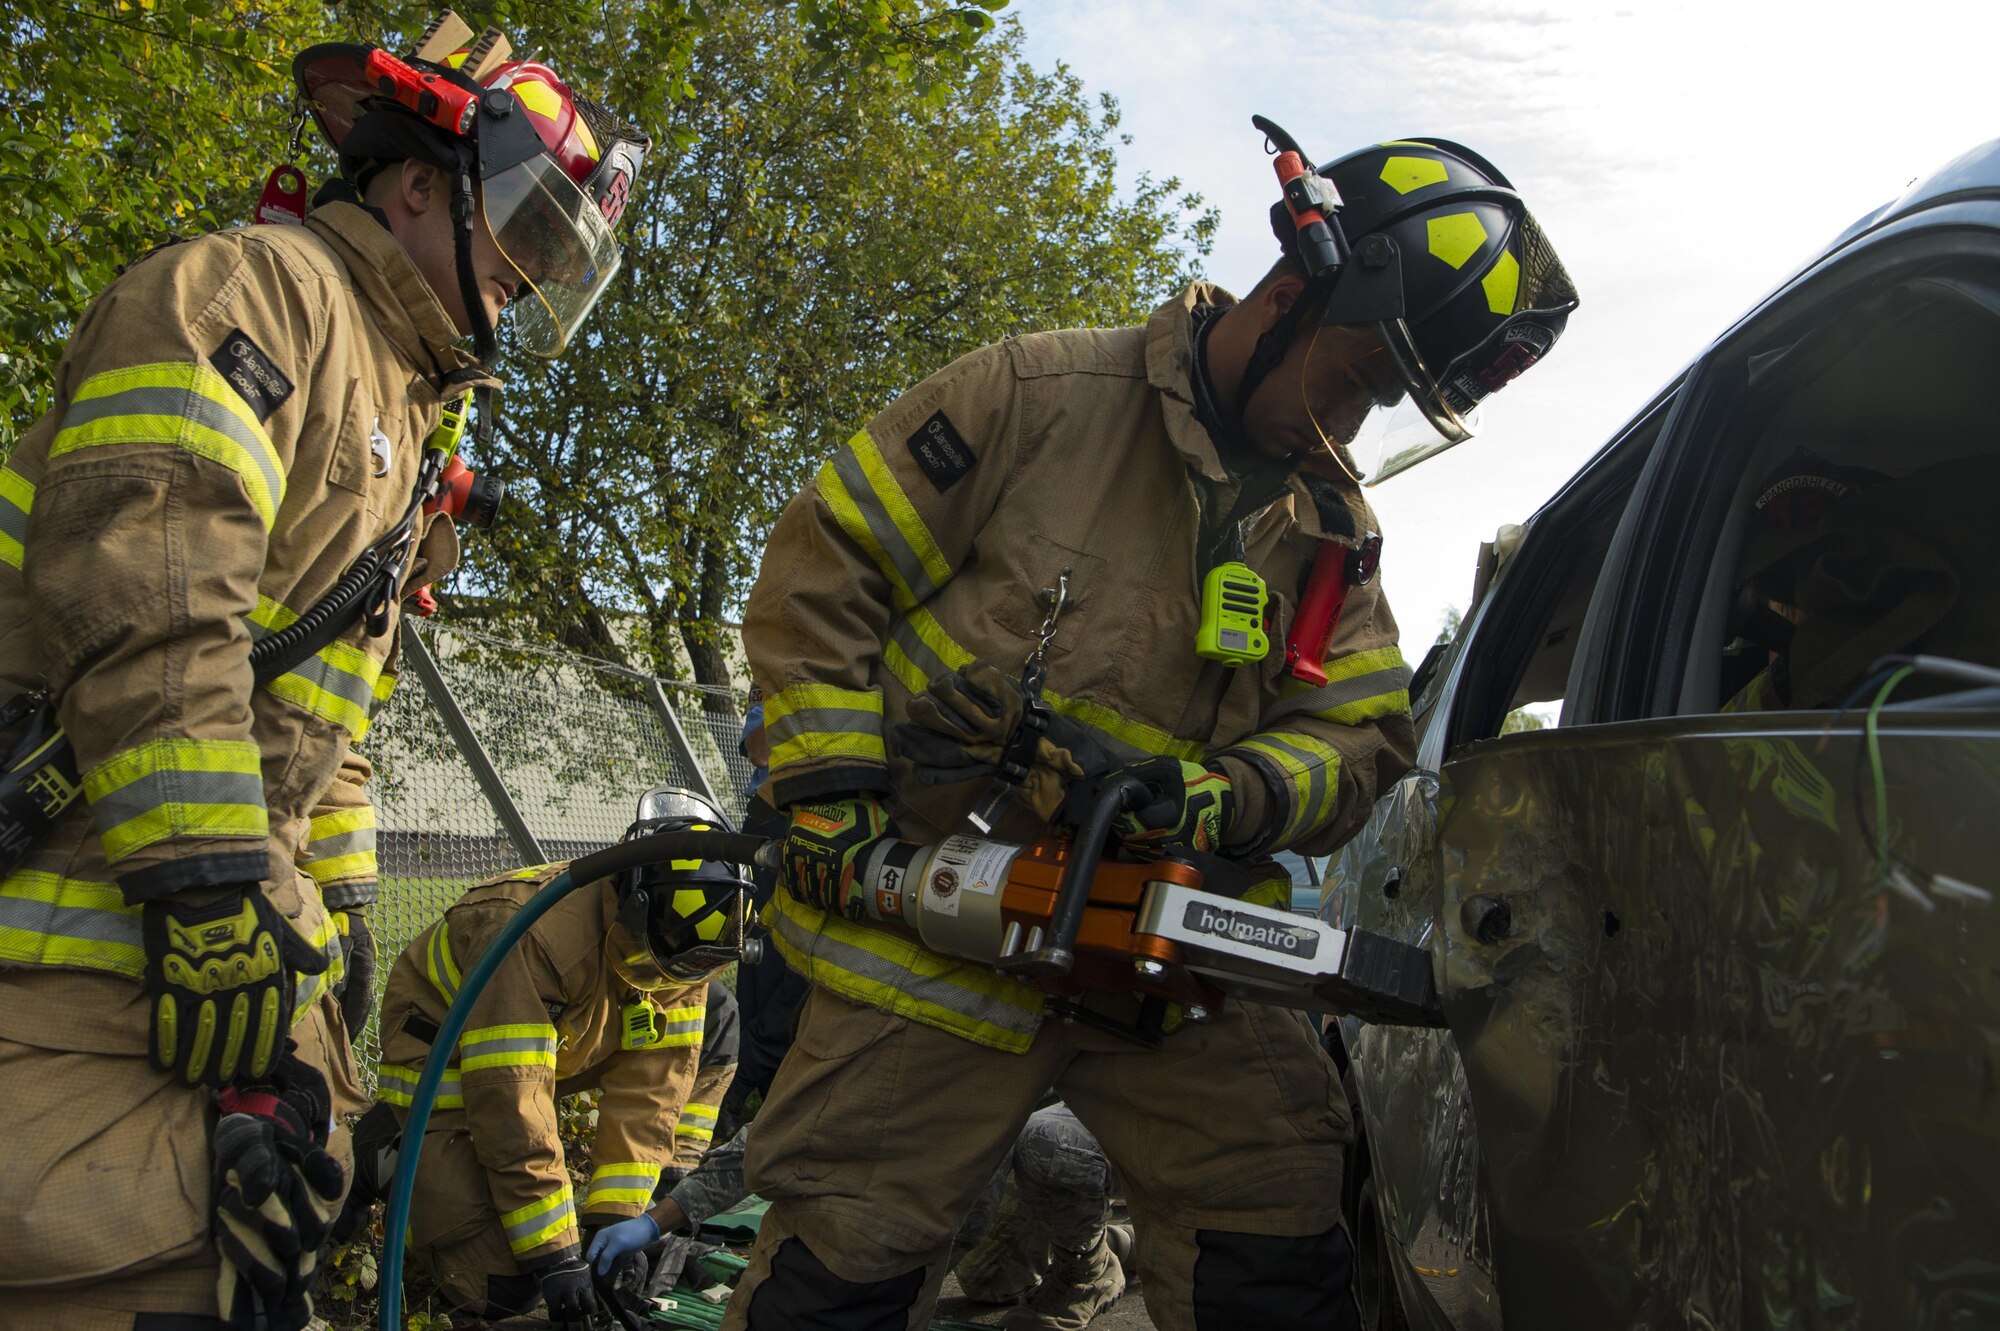 U.S. Air Force Staff Sgt. Anthoney Williams, left, and Senior Airman Kevin Maclean, right, 52nd Civil Engineer Squadron firefighters, use the Jaws-of-Life to extract a victim from a simulated vehicle accident at Spangdahlem Air Base, Germany, Oct. 19, 2017. Airmen from the 52nd CES and 52nd Medical Operations Support Squadron train together to practice and execute skills needed for real world scenarios. (U.S. Air Force photo by Senior Airman Dawn M. Weber)